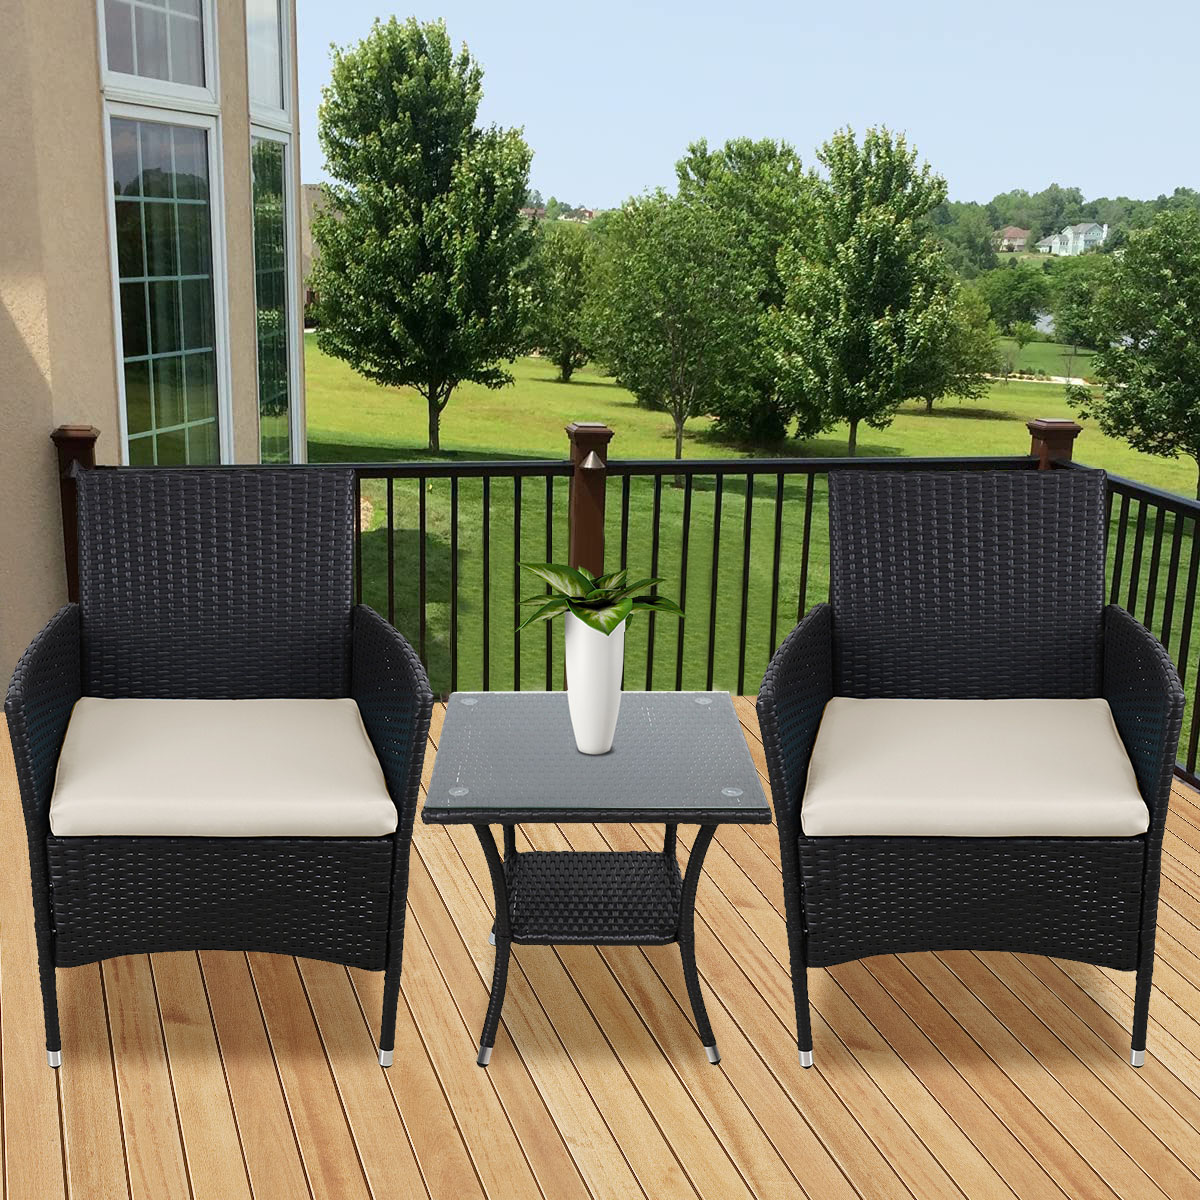 Clearance! Patio Table and Chairs, 3 Pieces Wicker Patio Furniture Sets ...